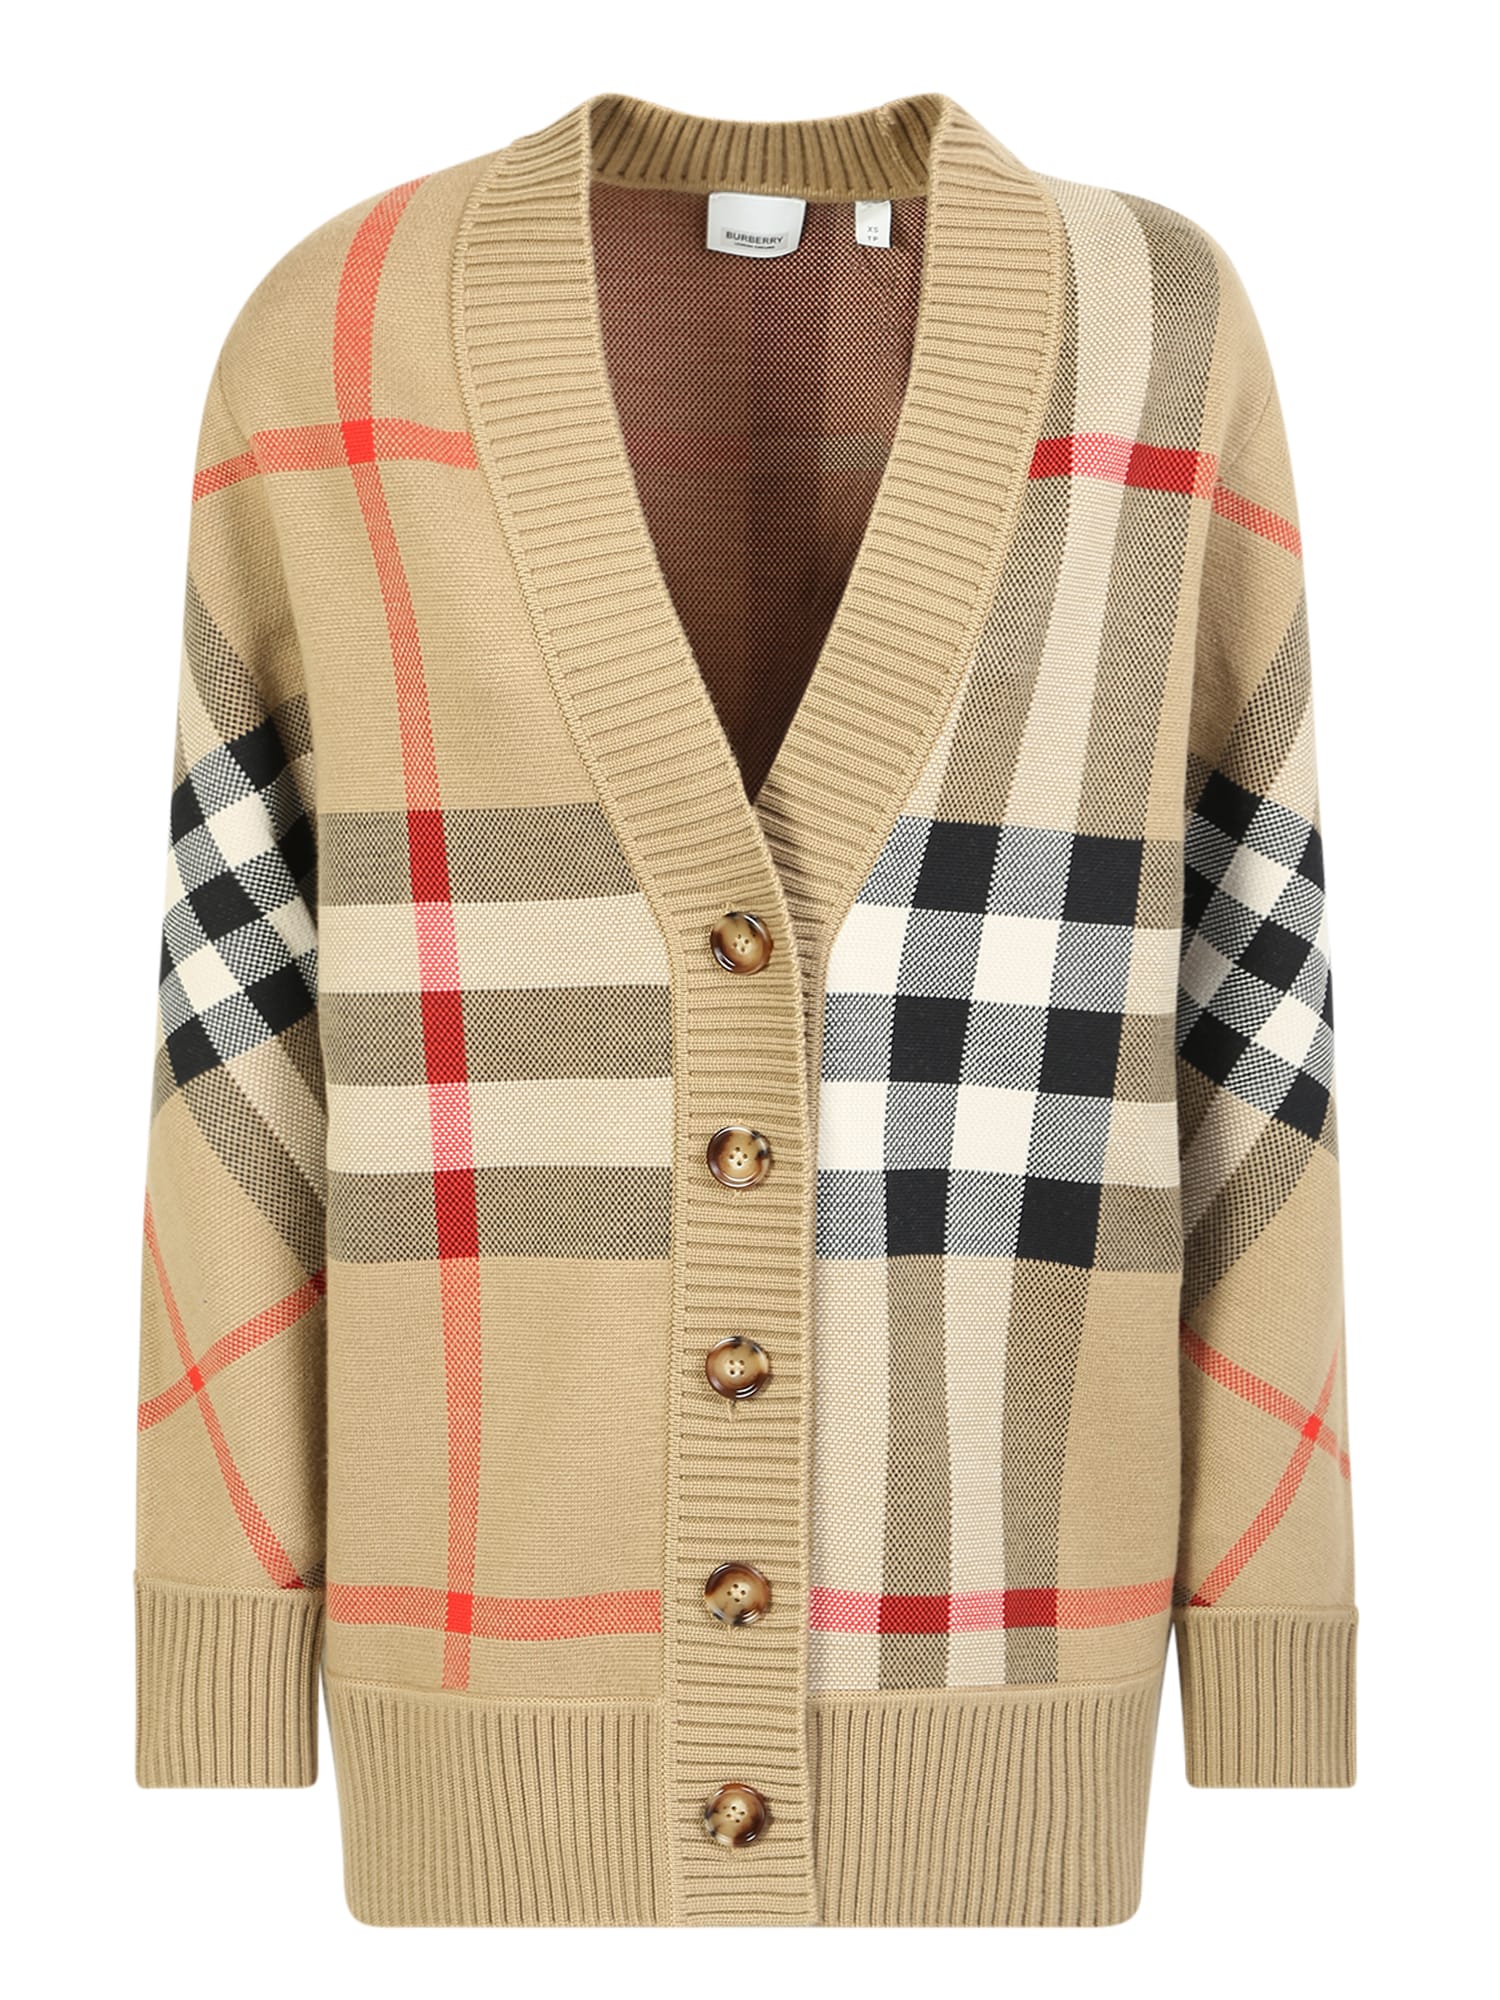 Burberry Merino Wool Pullover With The Unmistakable Vintage Check Motif Reproduced In Jacquard Weave